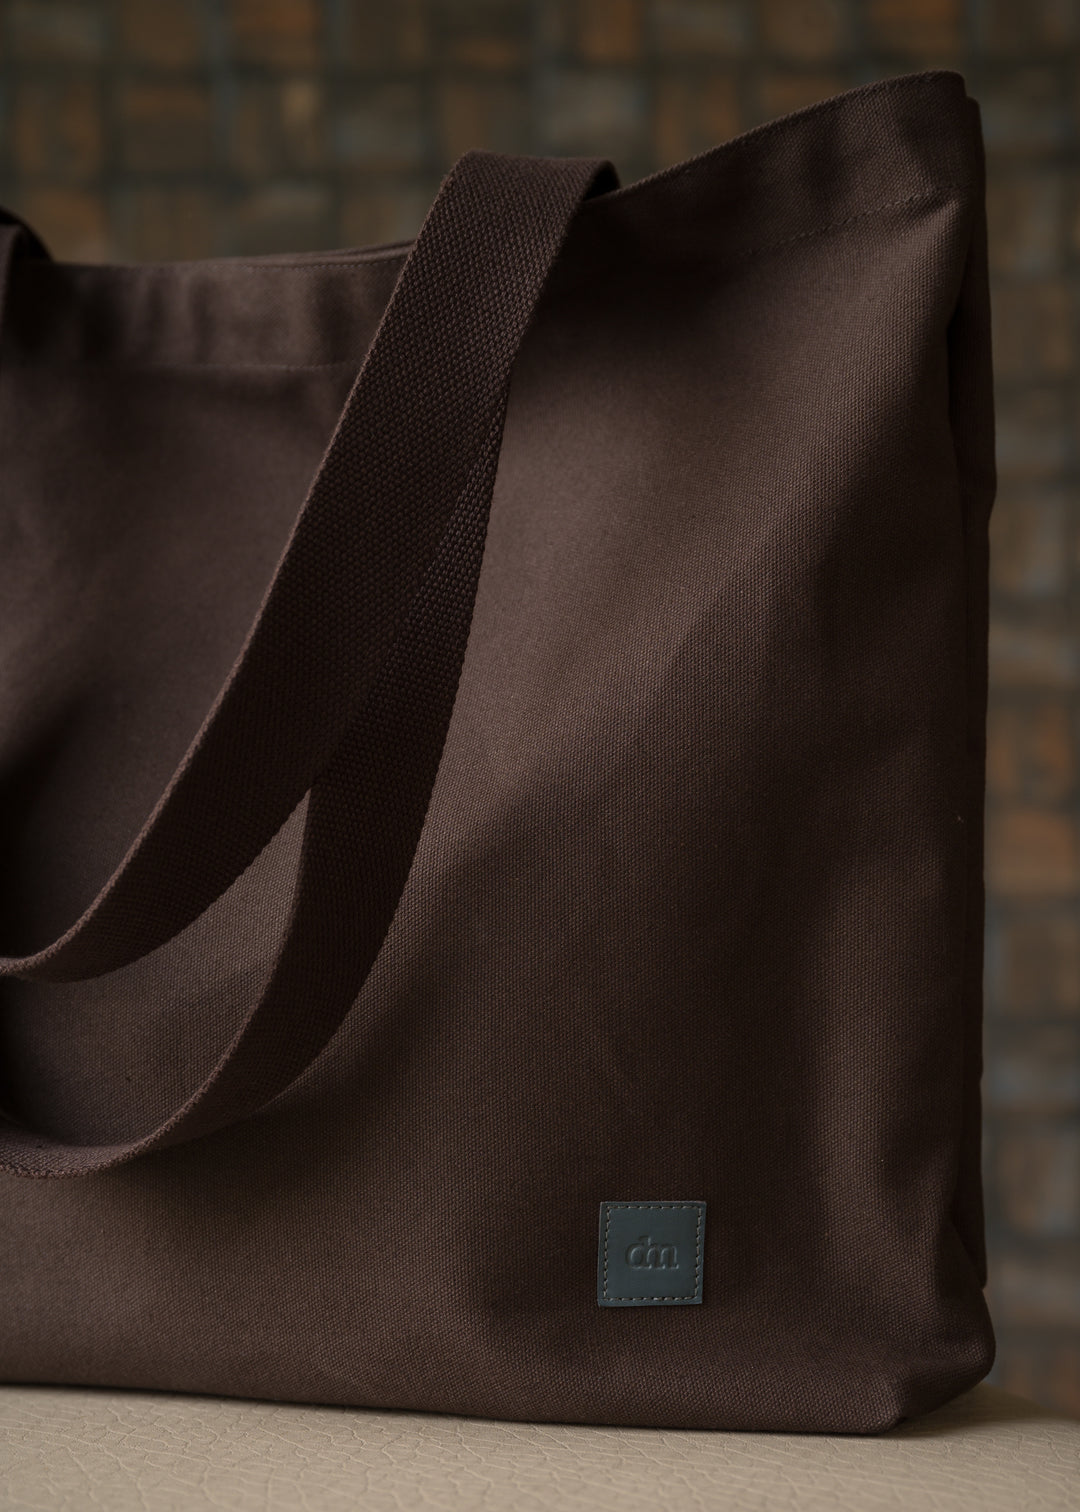 Crater — Heavy Duty Tote Bag